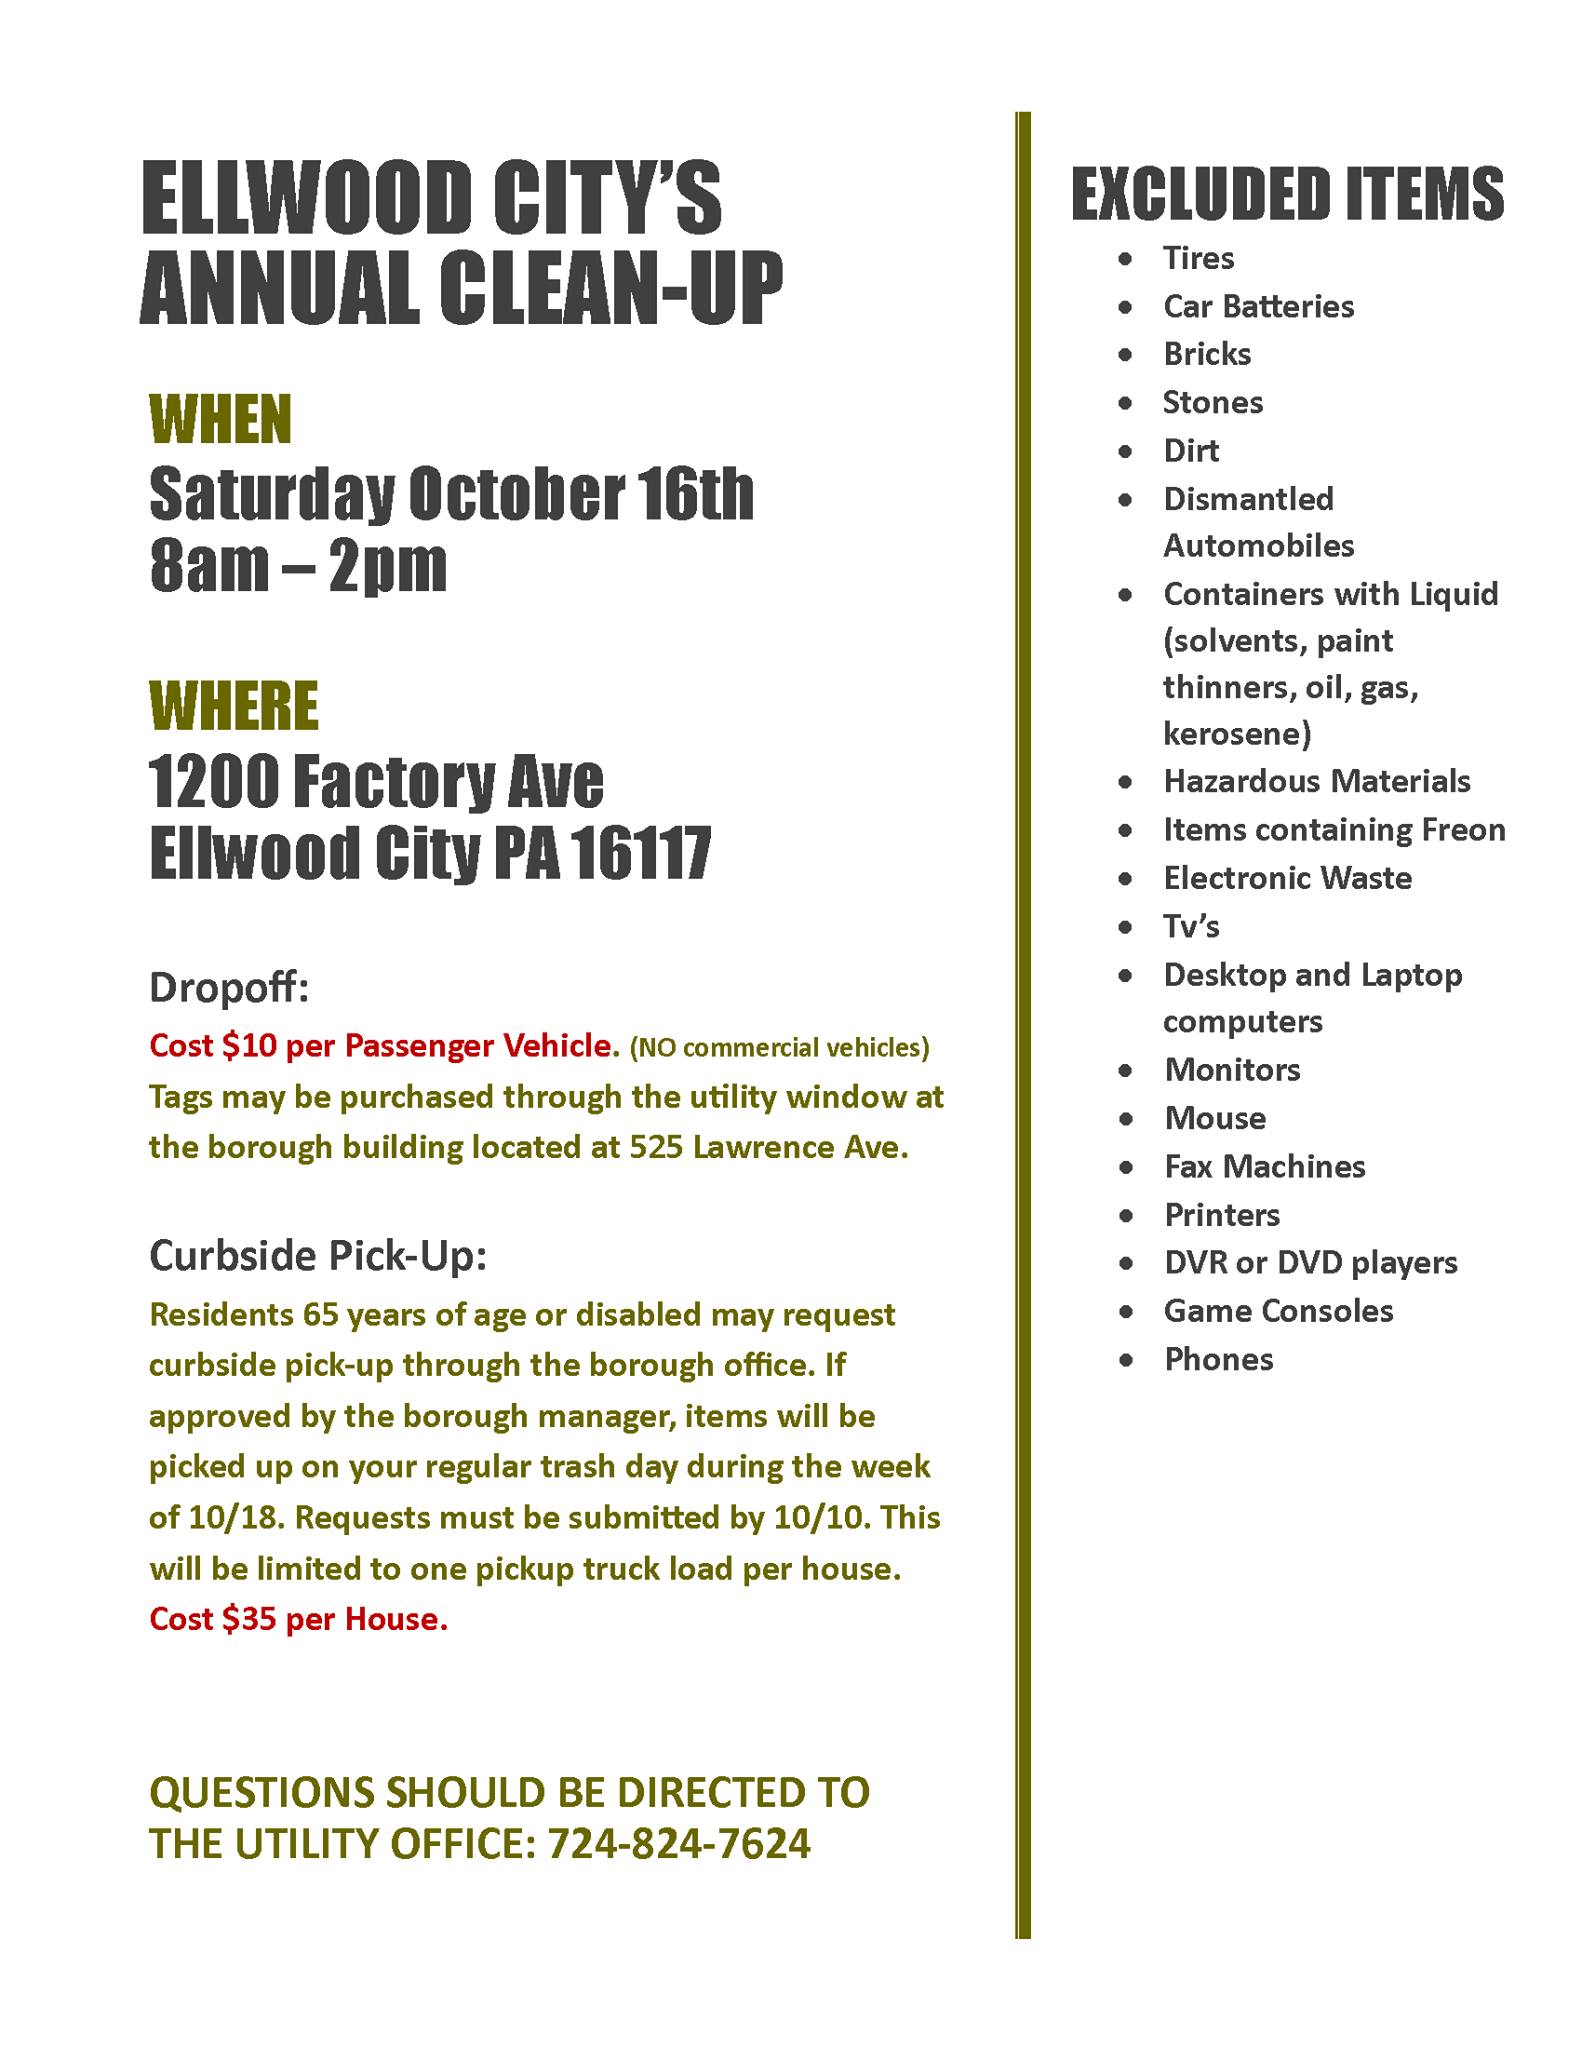 ellwood cleanup